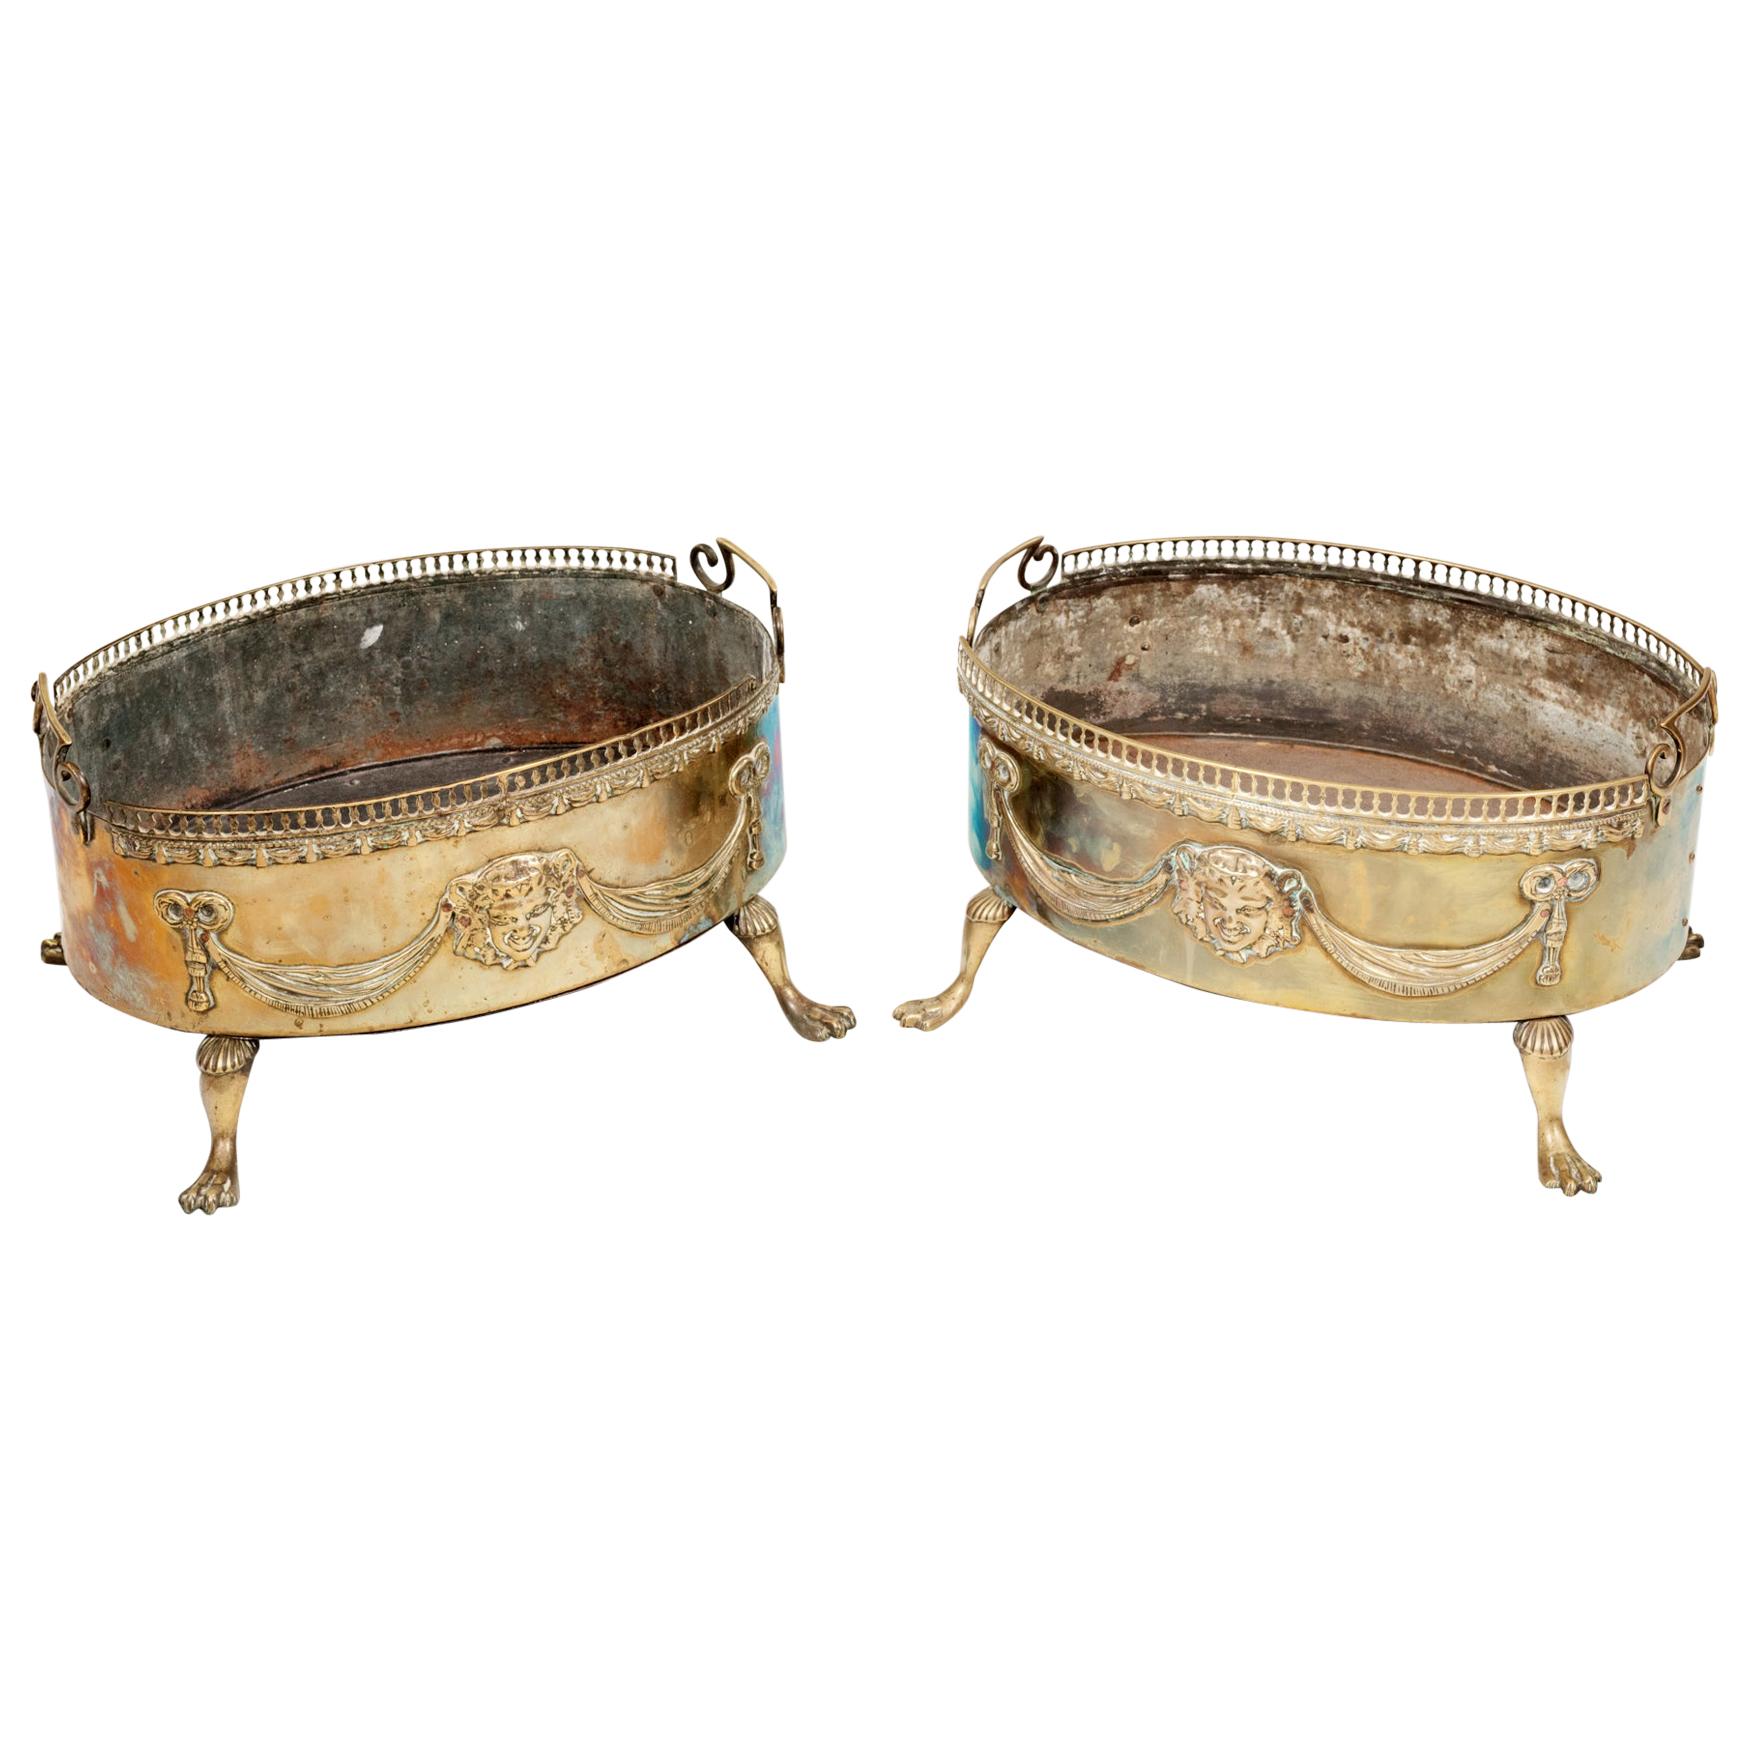 Early 19th Century Pair of Decorative Brass Oval Planters